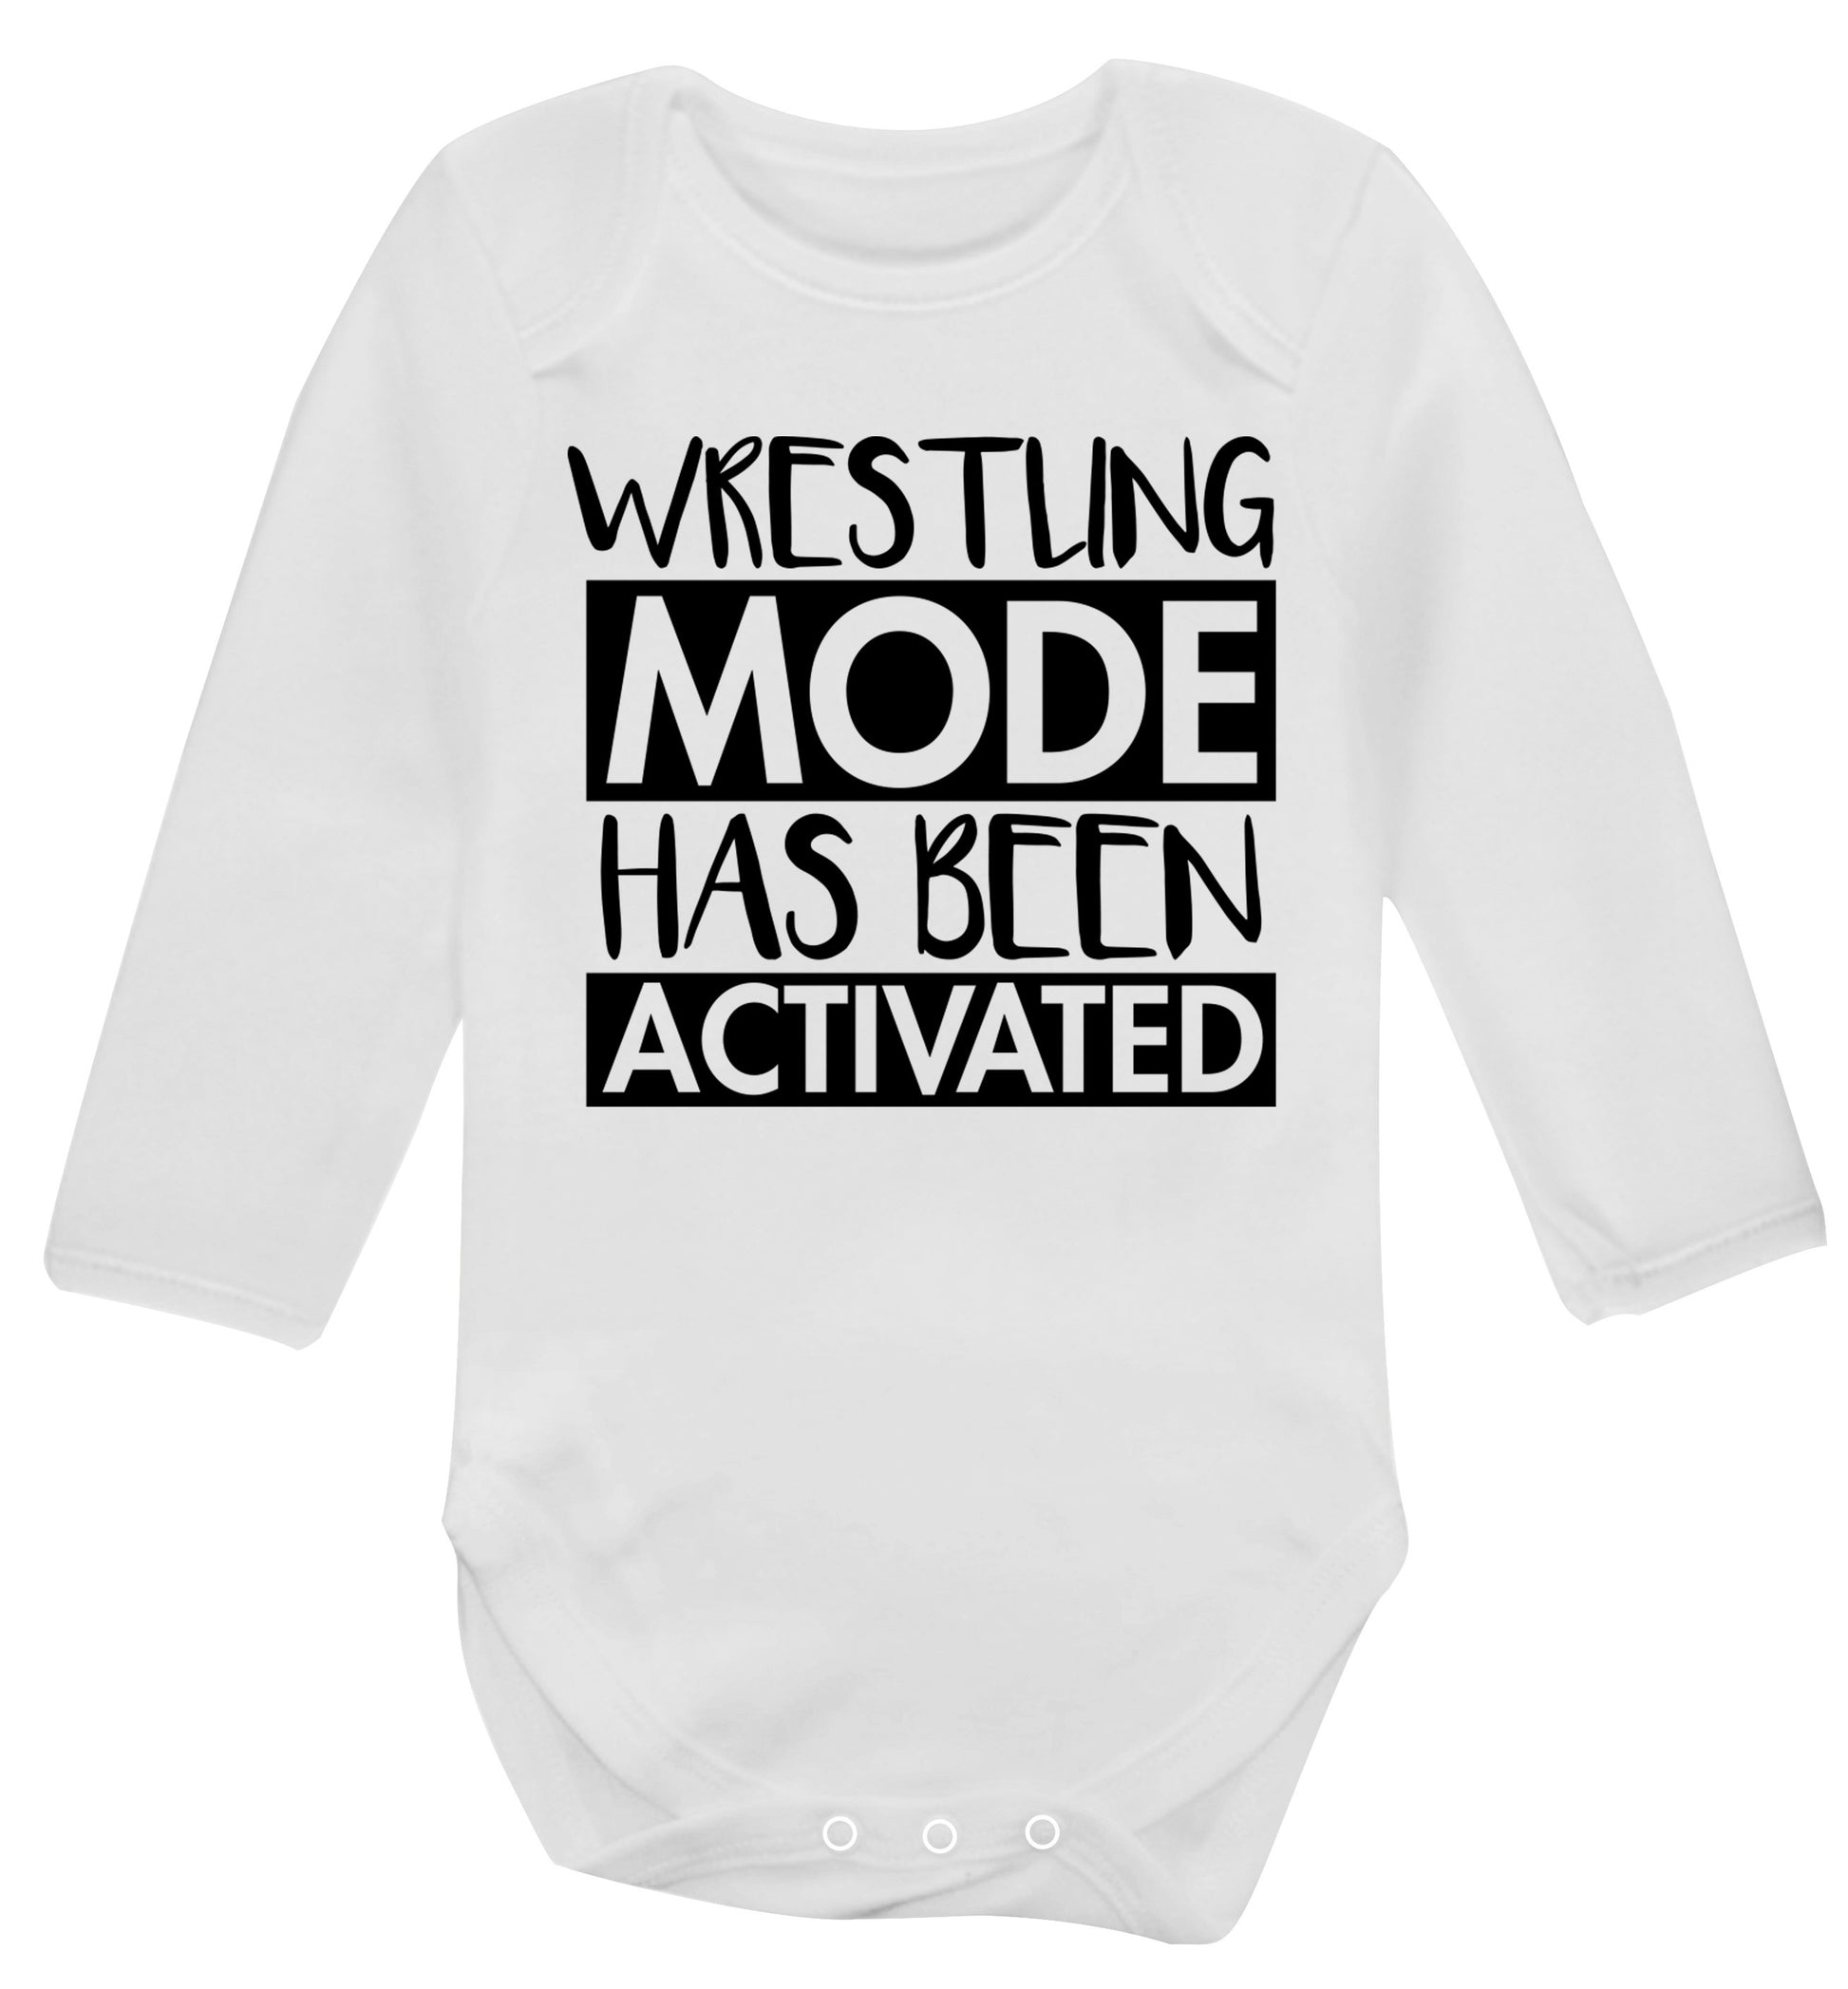 Wresting mode activated Baby Vest long sleeved white 6-12 months